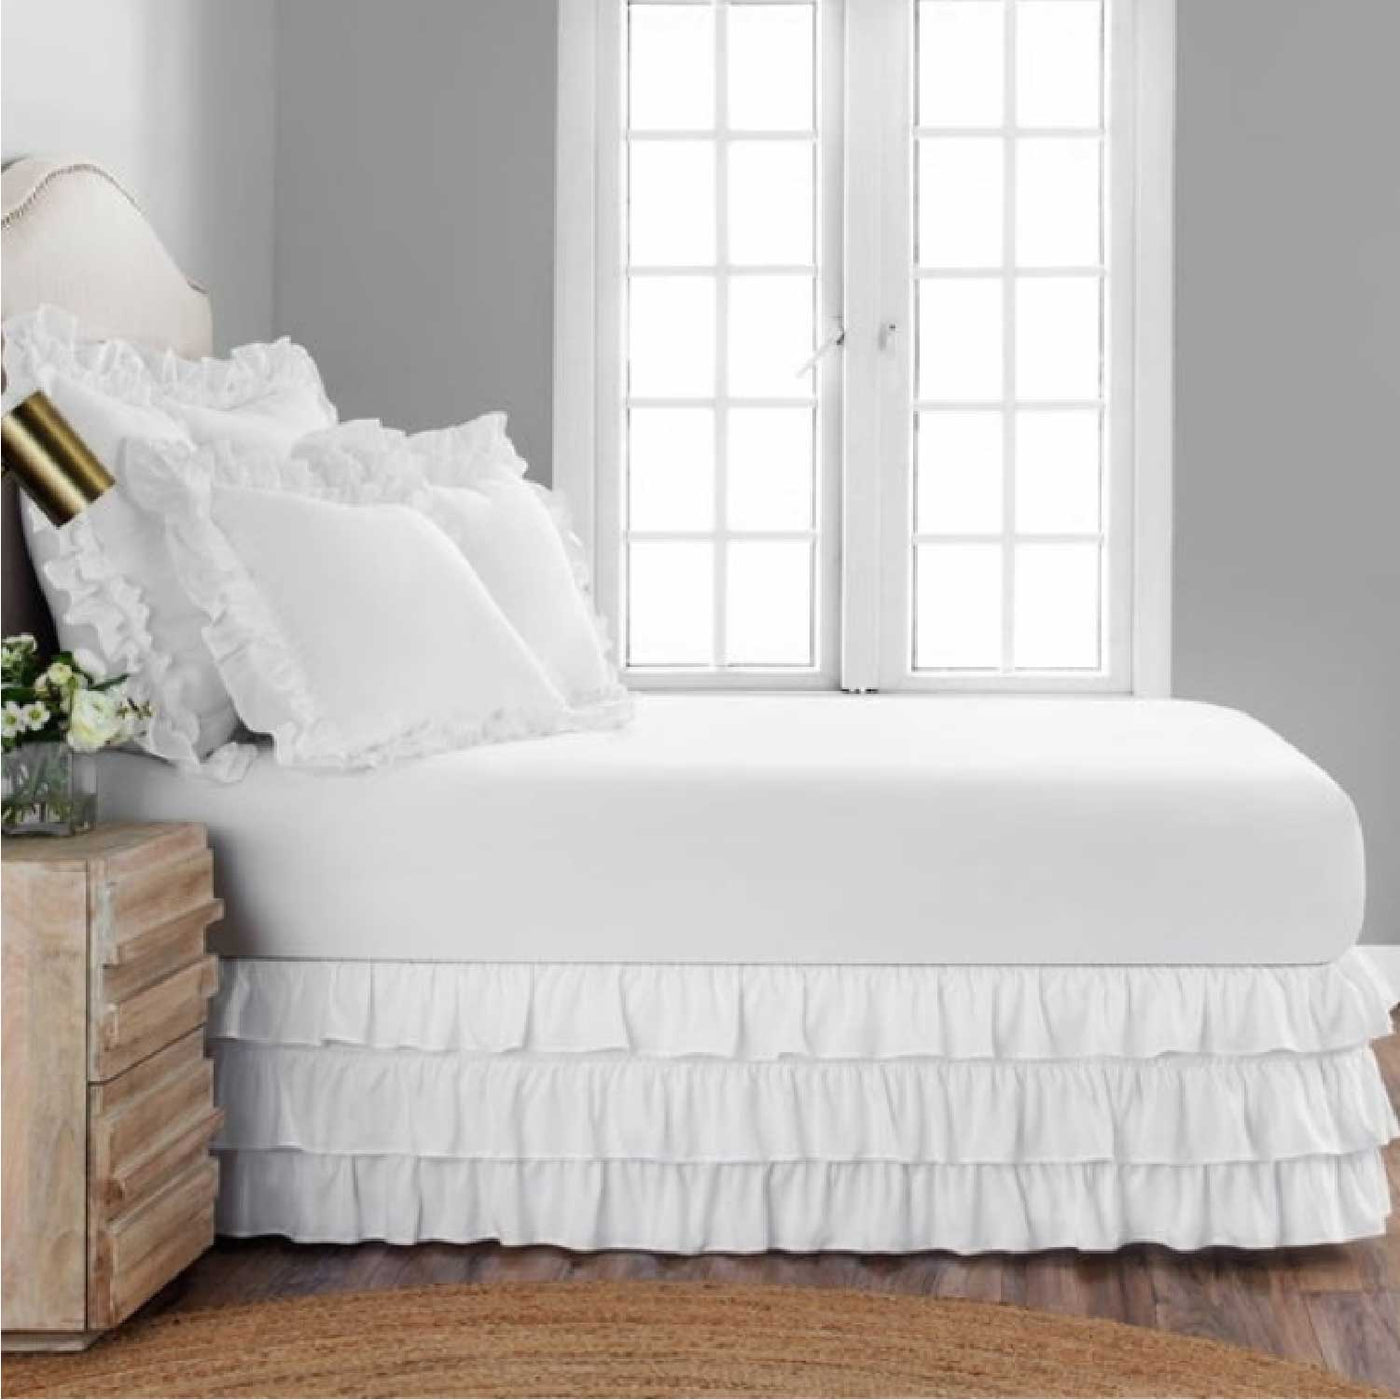 Tiered Waterfall Ruffle Bed Skirt 400 Thread Count 100% Egyptian Cotton